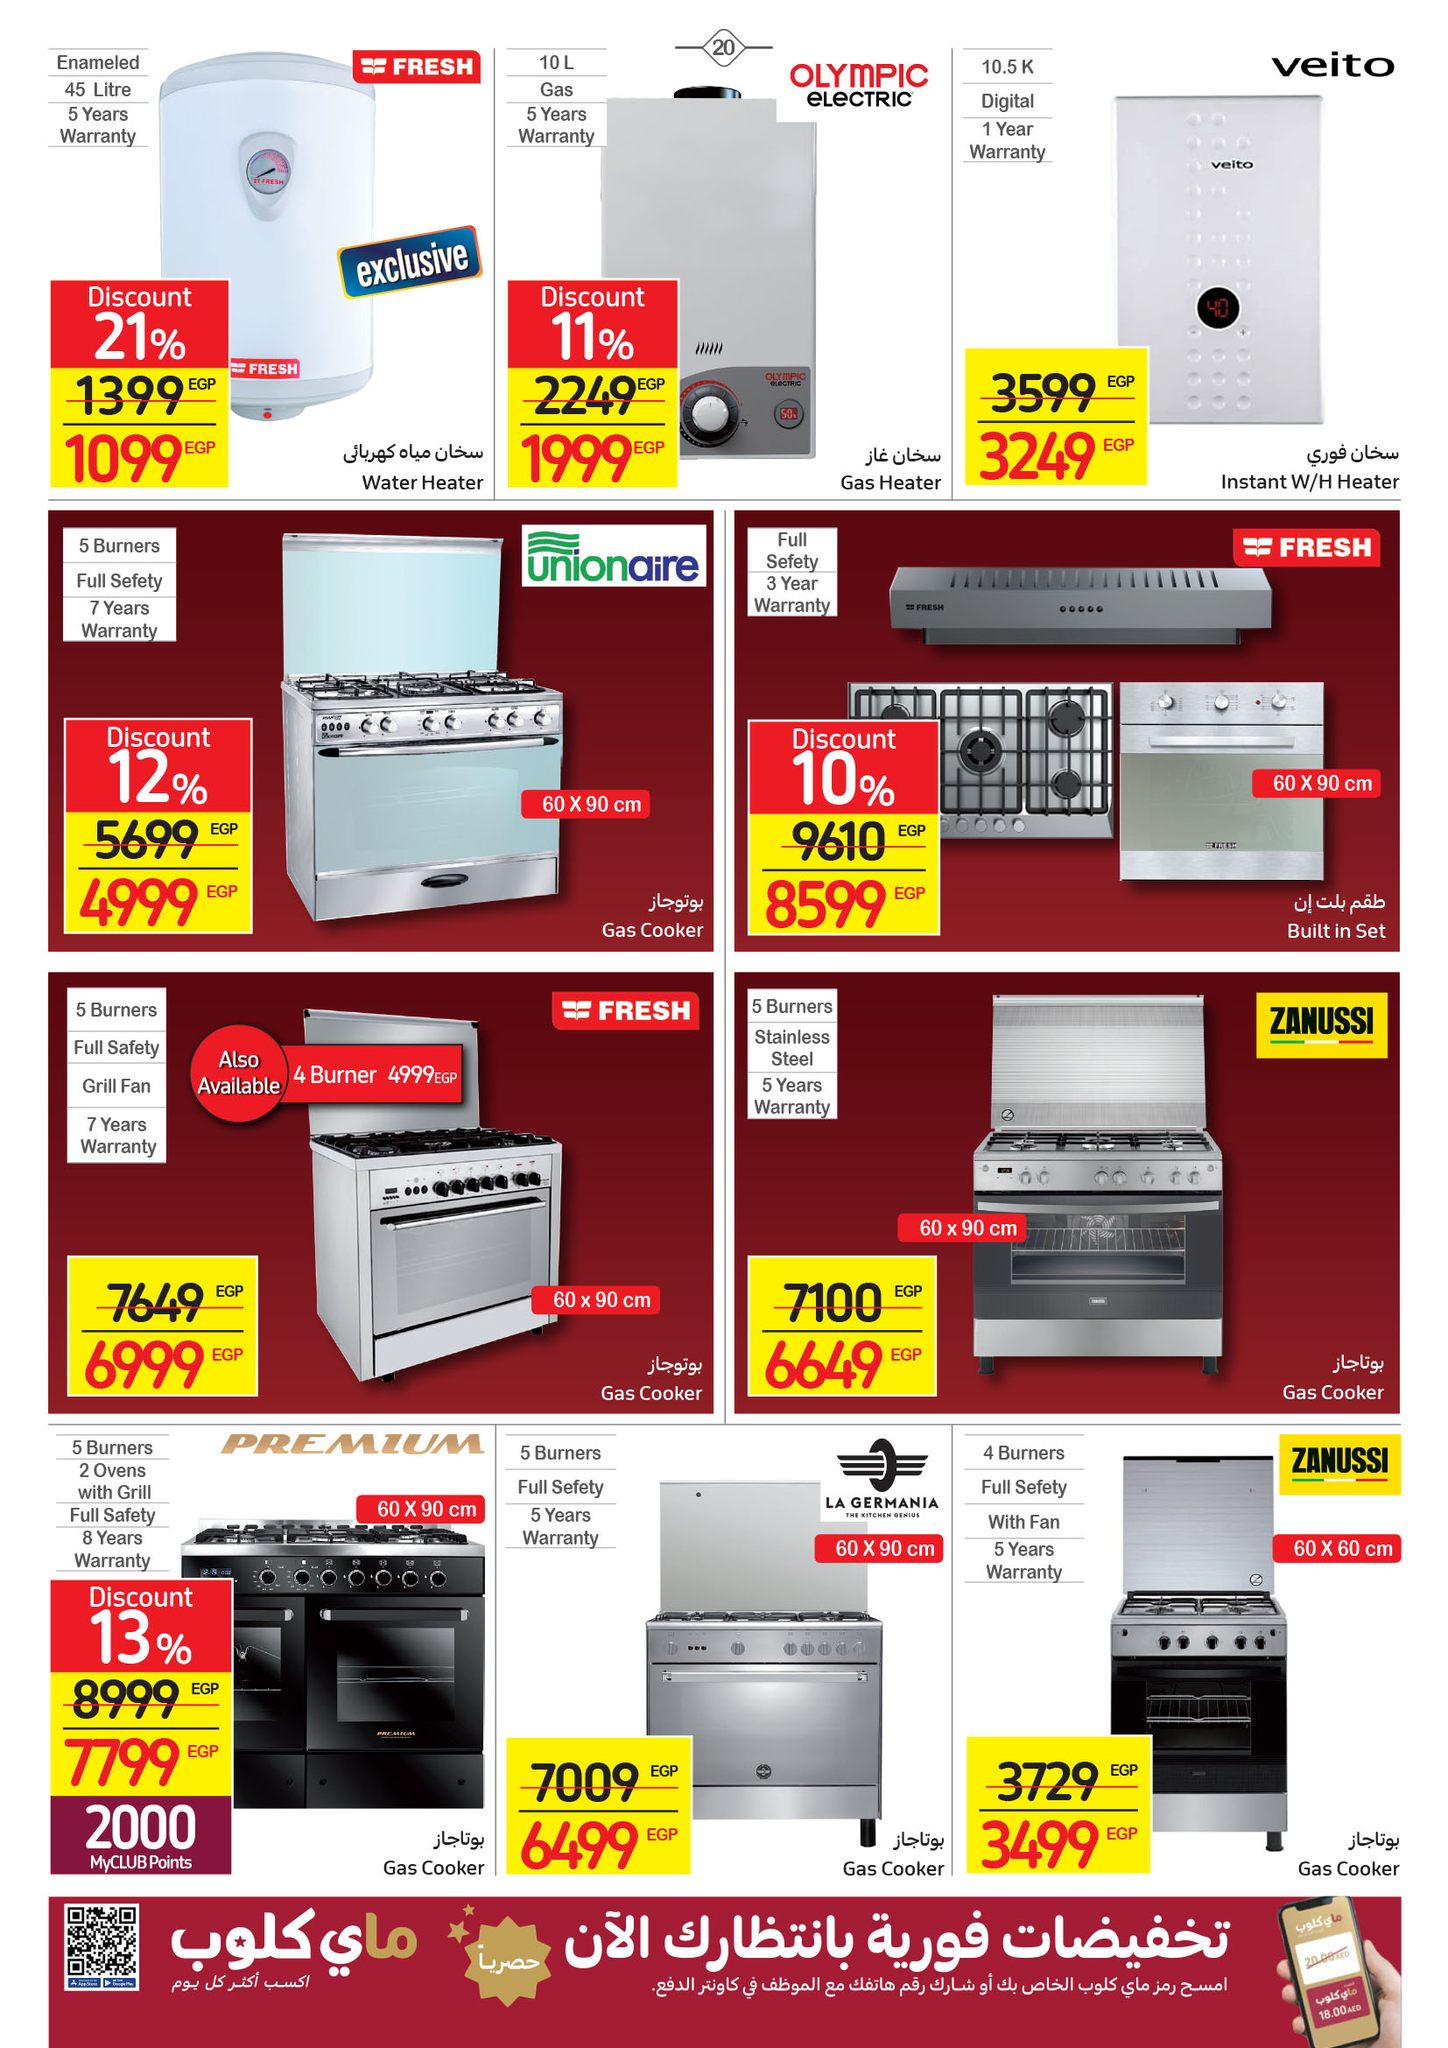 Watch the latest Carrefour half price offers "Last Chance Offer" until December 4 20